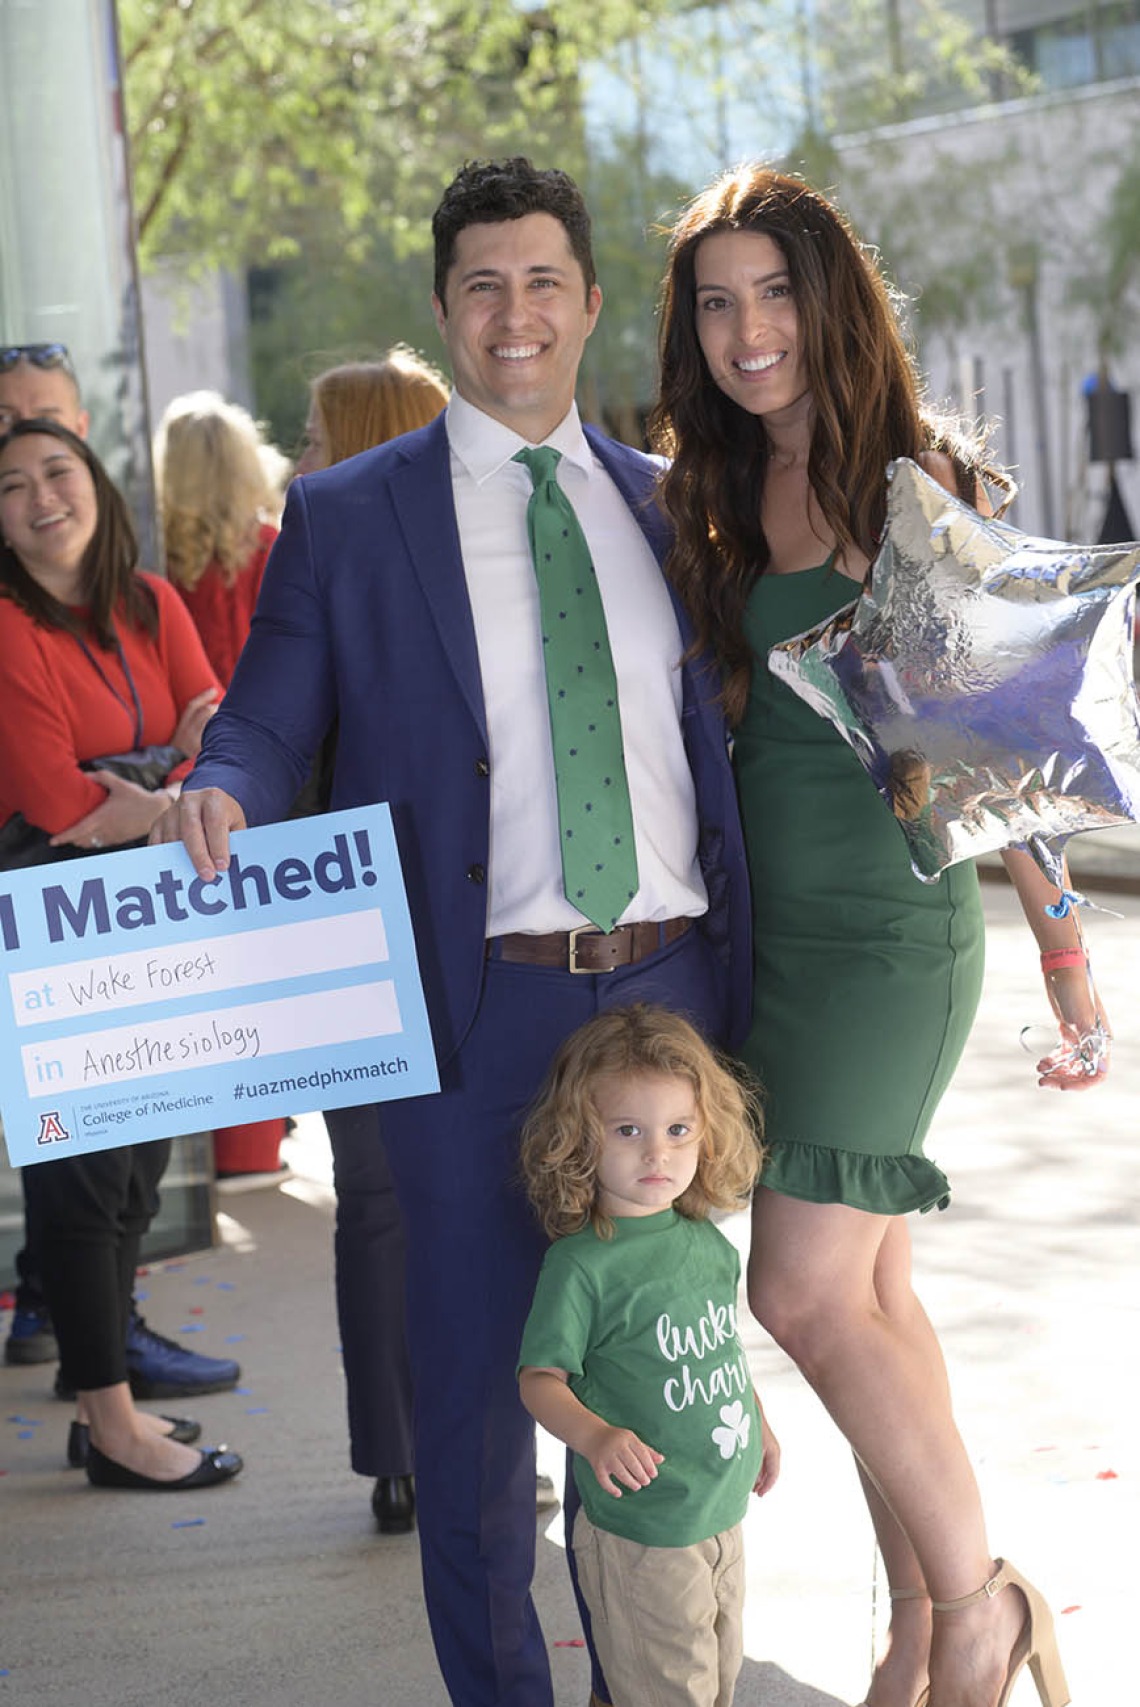 A light skinned man in a suite with his wife and child smile. He holds a poster that says "I Matched"